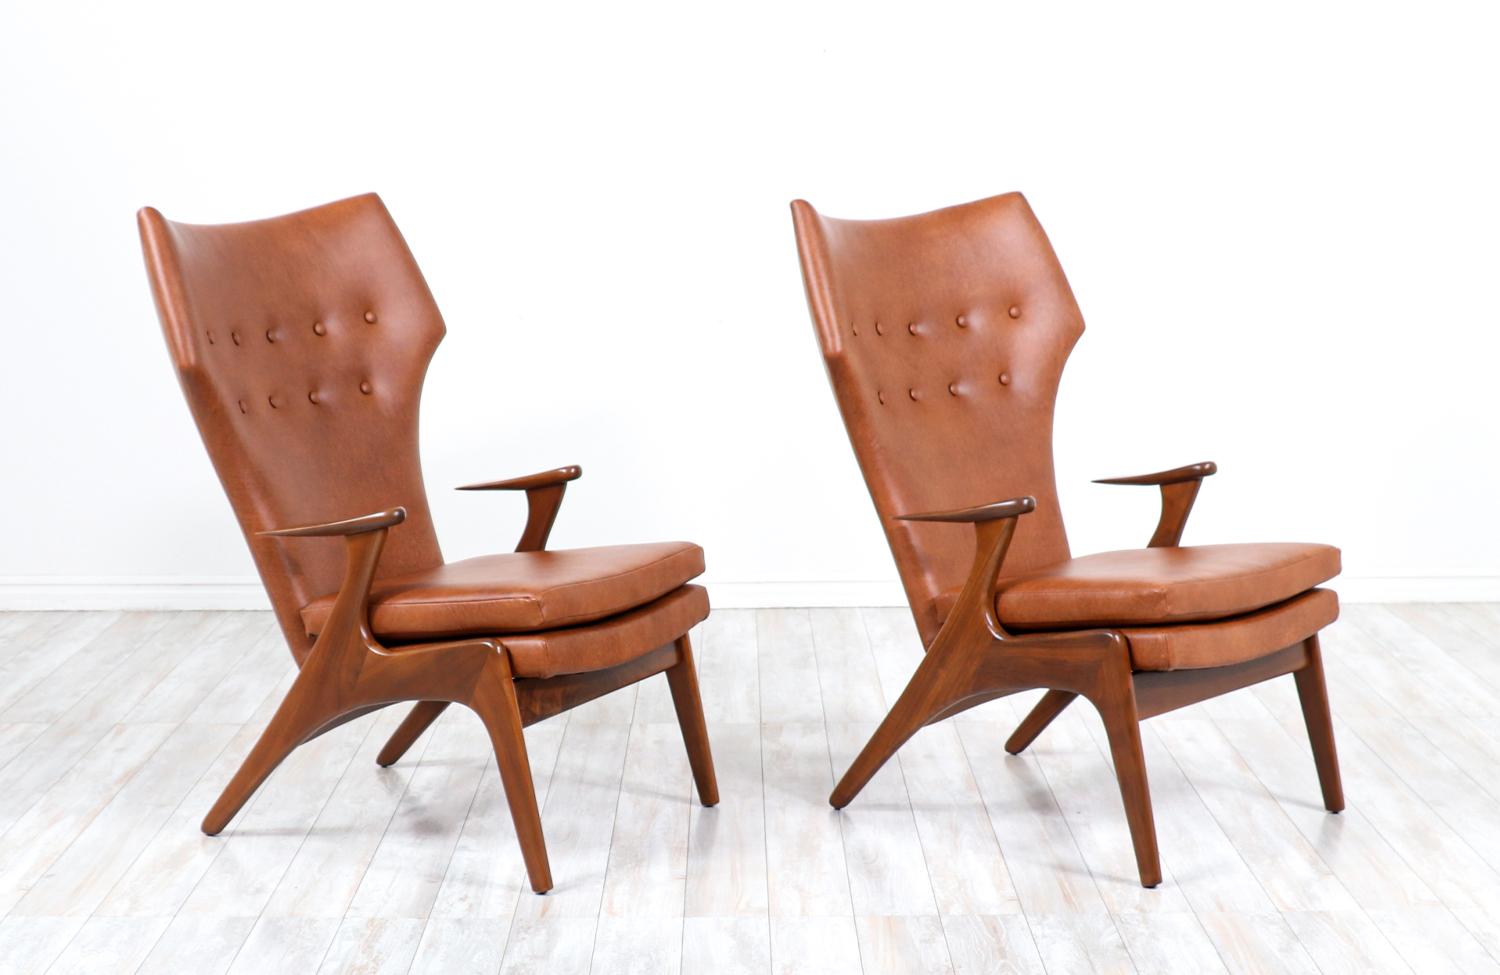 Pair of dtylish modern high wing-back chairs designed by Kurt Østervig for Rolschau Møbler in Denmark circa 1950s. These gorgeous chairs design features a solid walnut wood frame with curved leaf-shaped armrests balancing the design's symmetry while